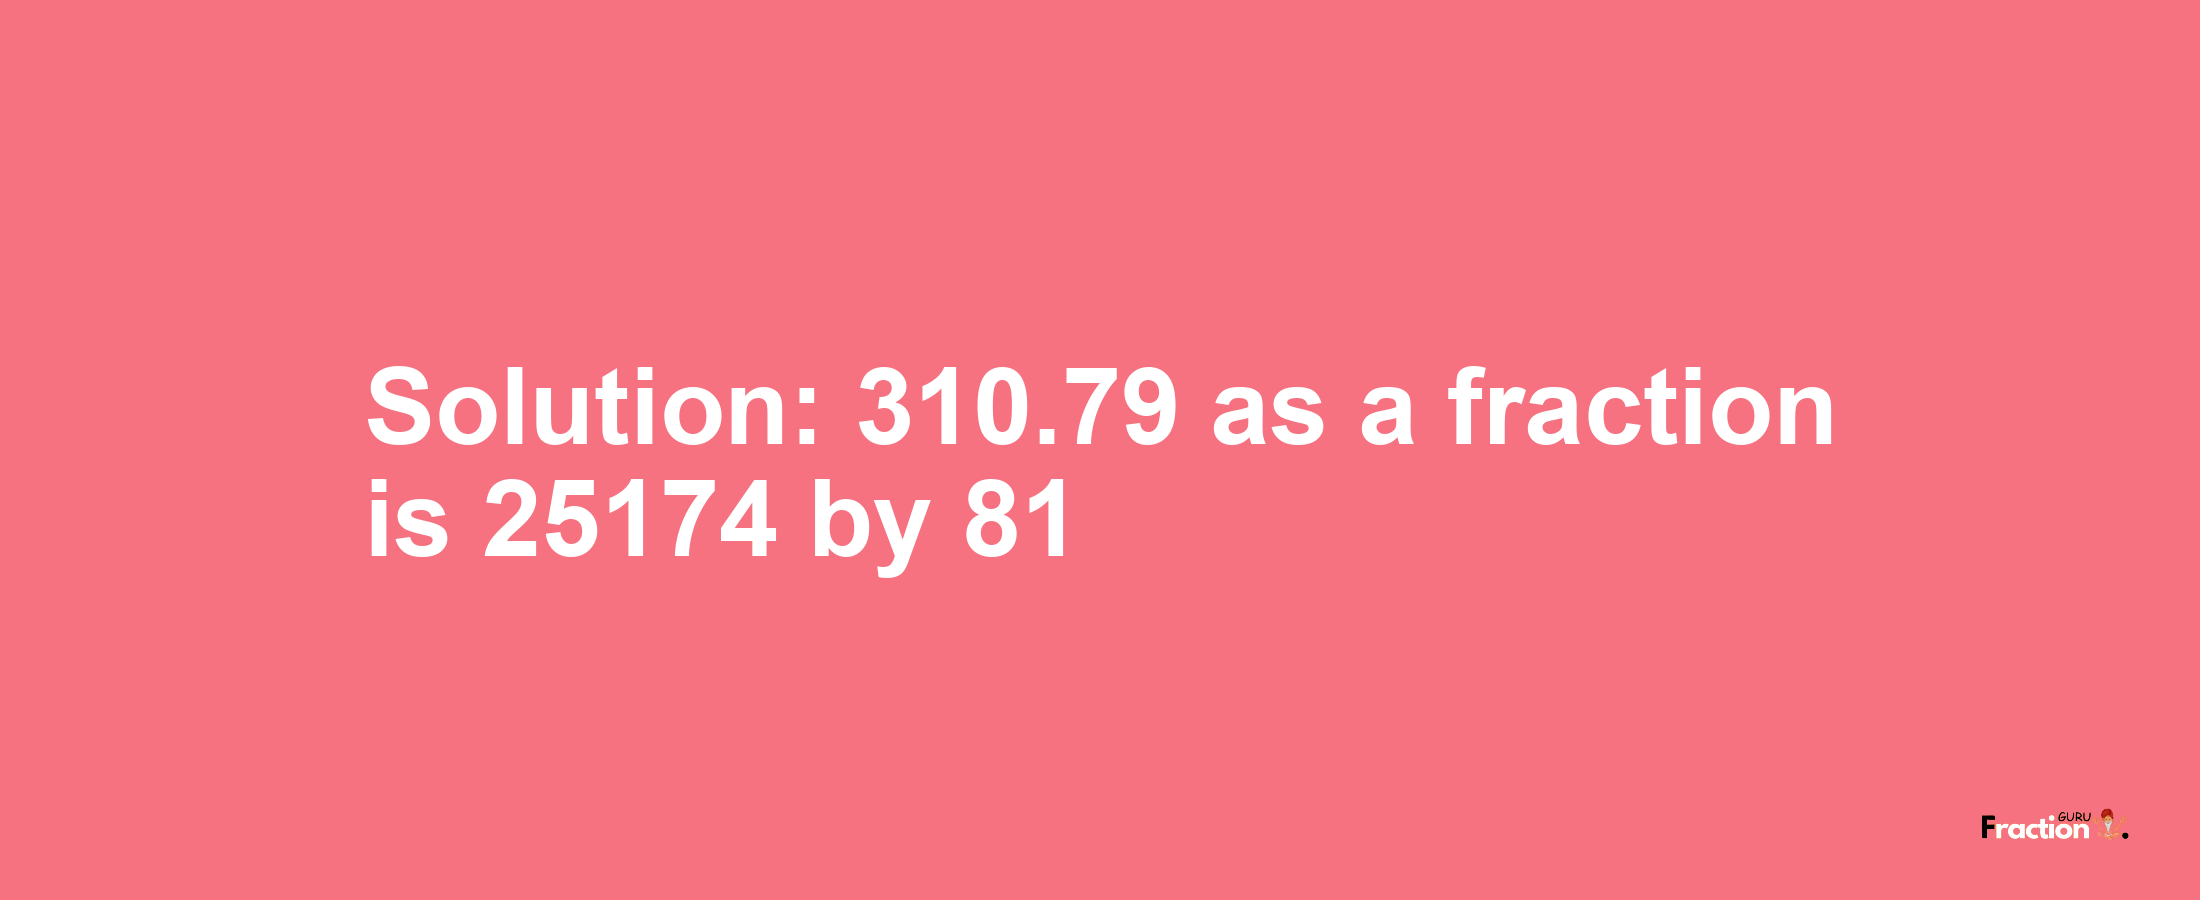 Solution:310.79 as a fraction is 25174/81